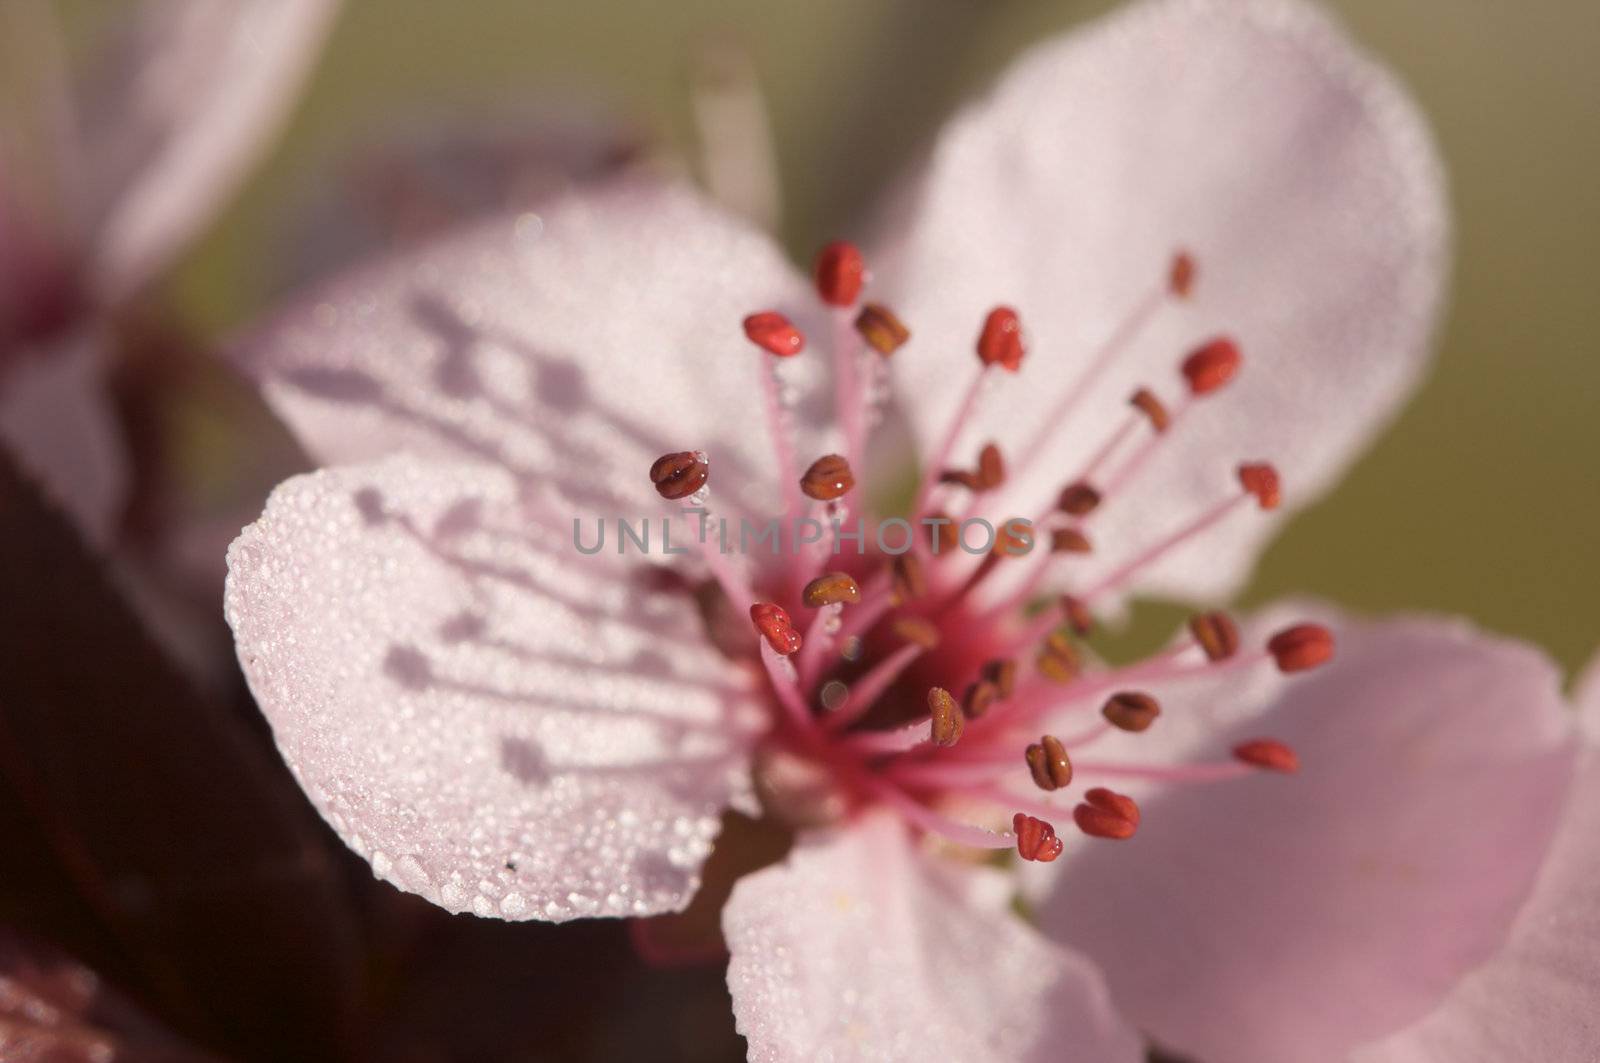 Early Spring Pink Tree Blossoms and Dew Drops with Narrow Depth of Field.